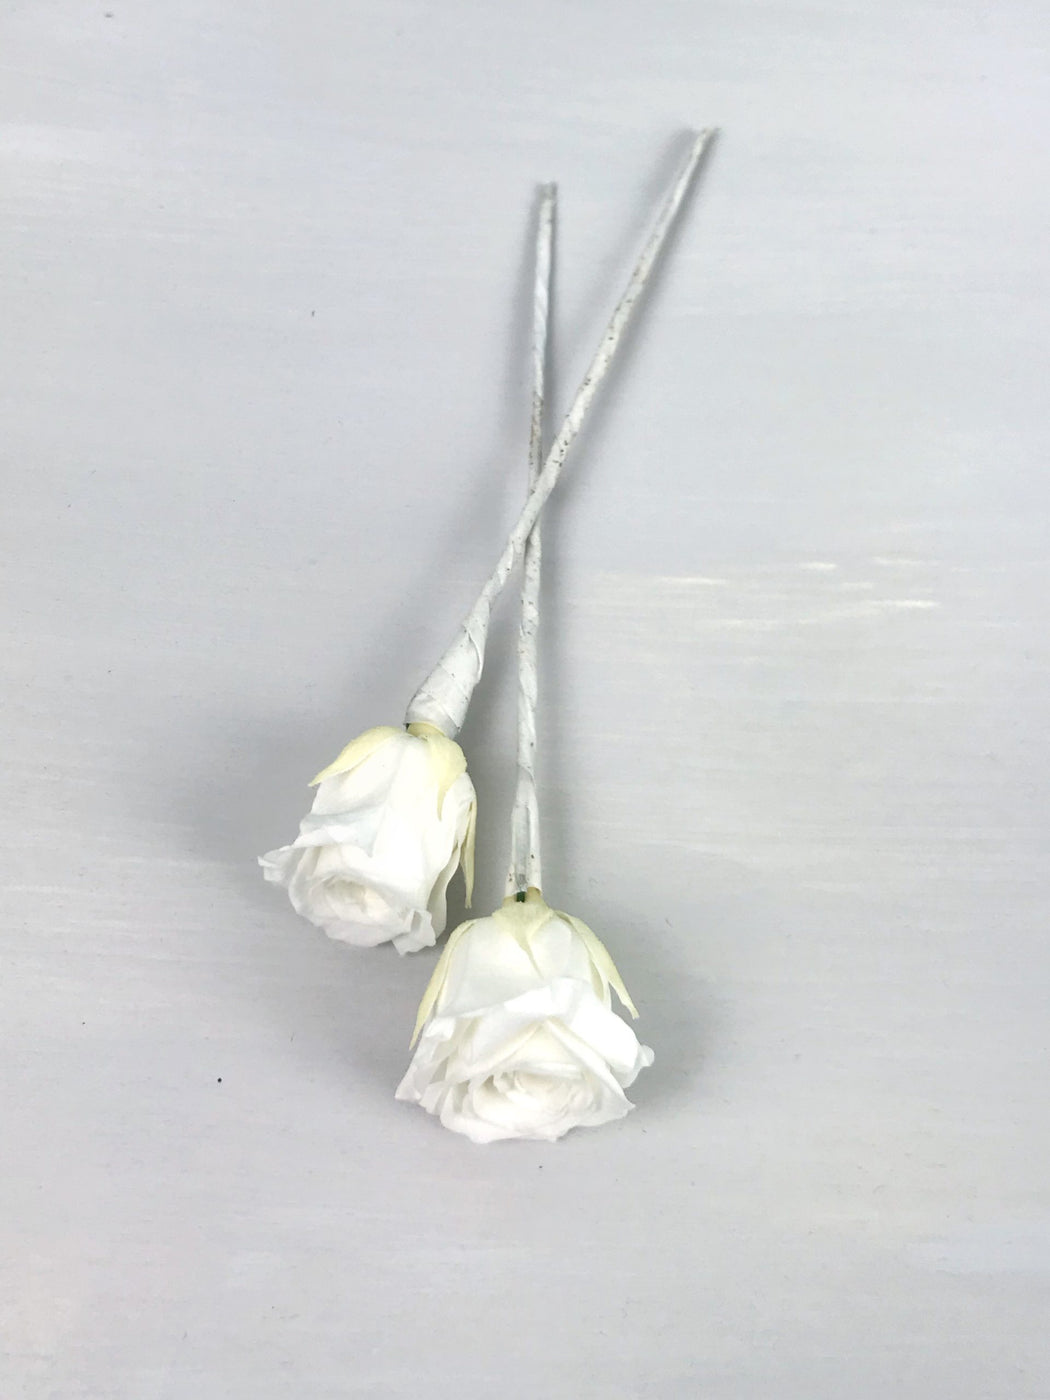 Two small rose spikes stabilized wedding hair decoration, wedding decoration